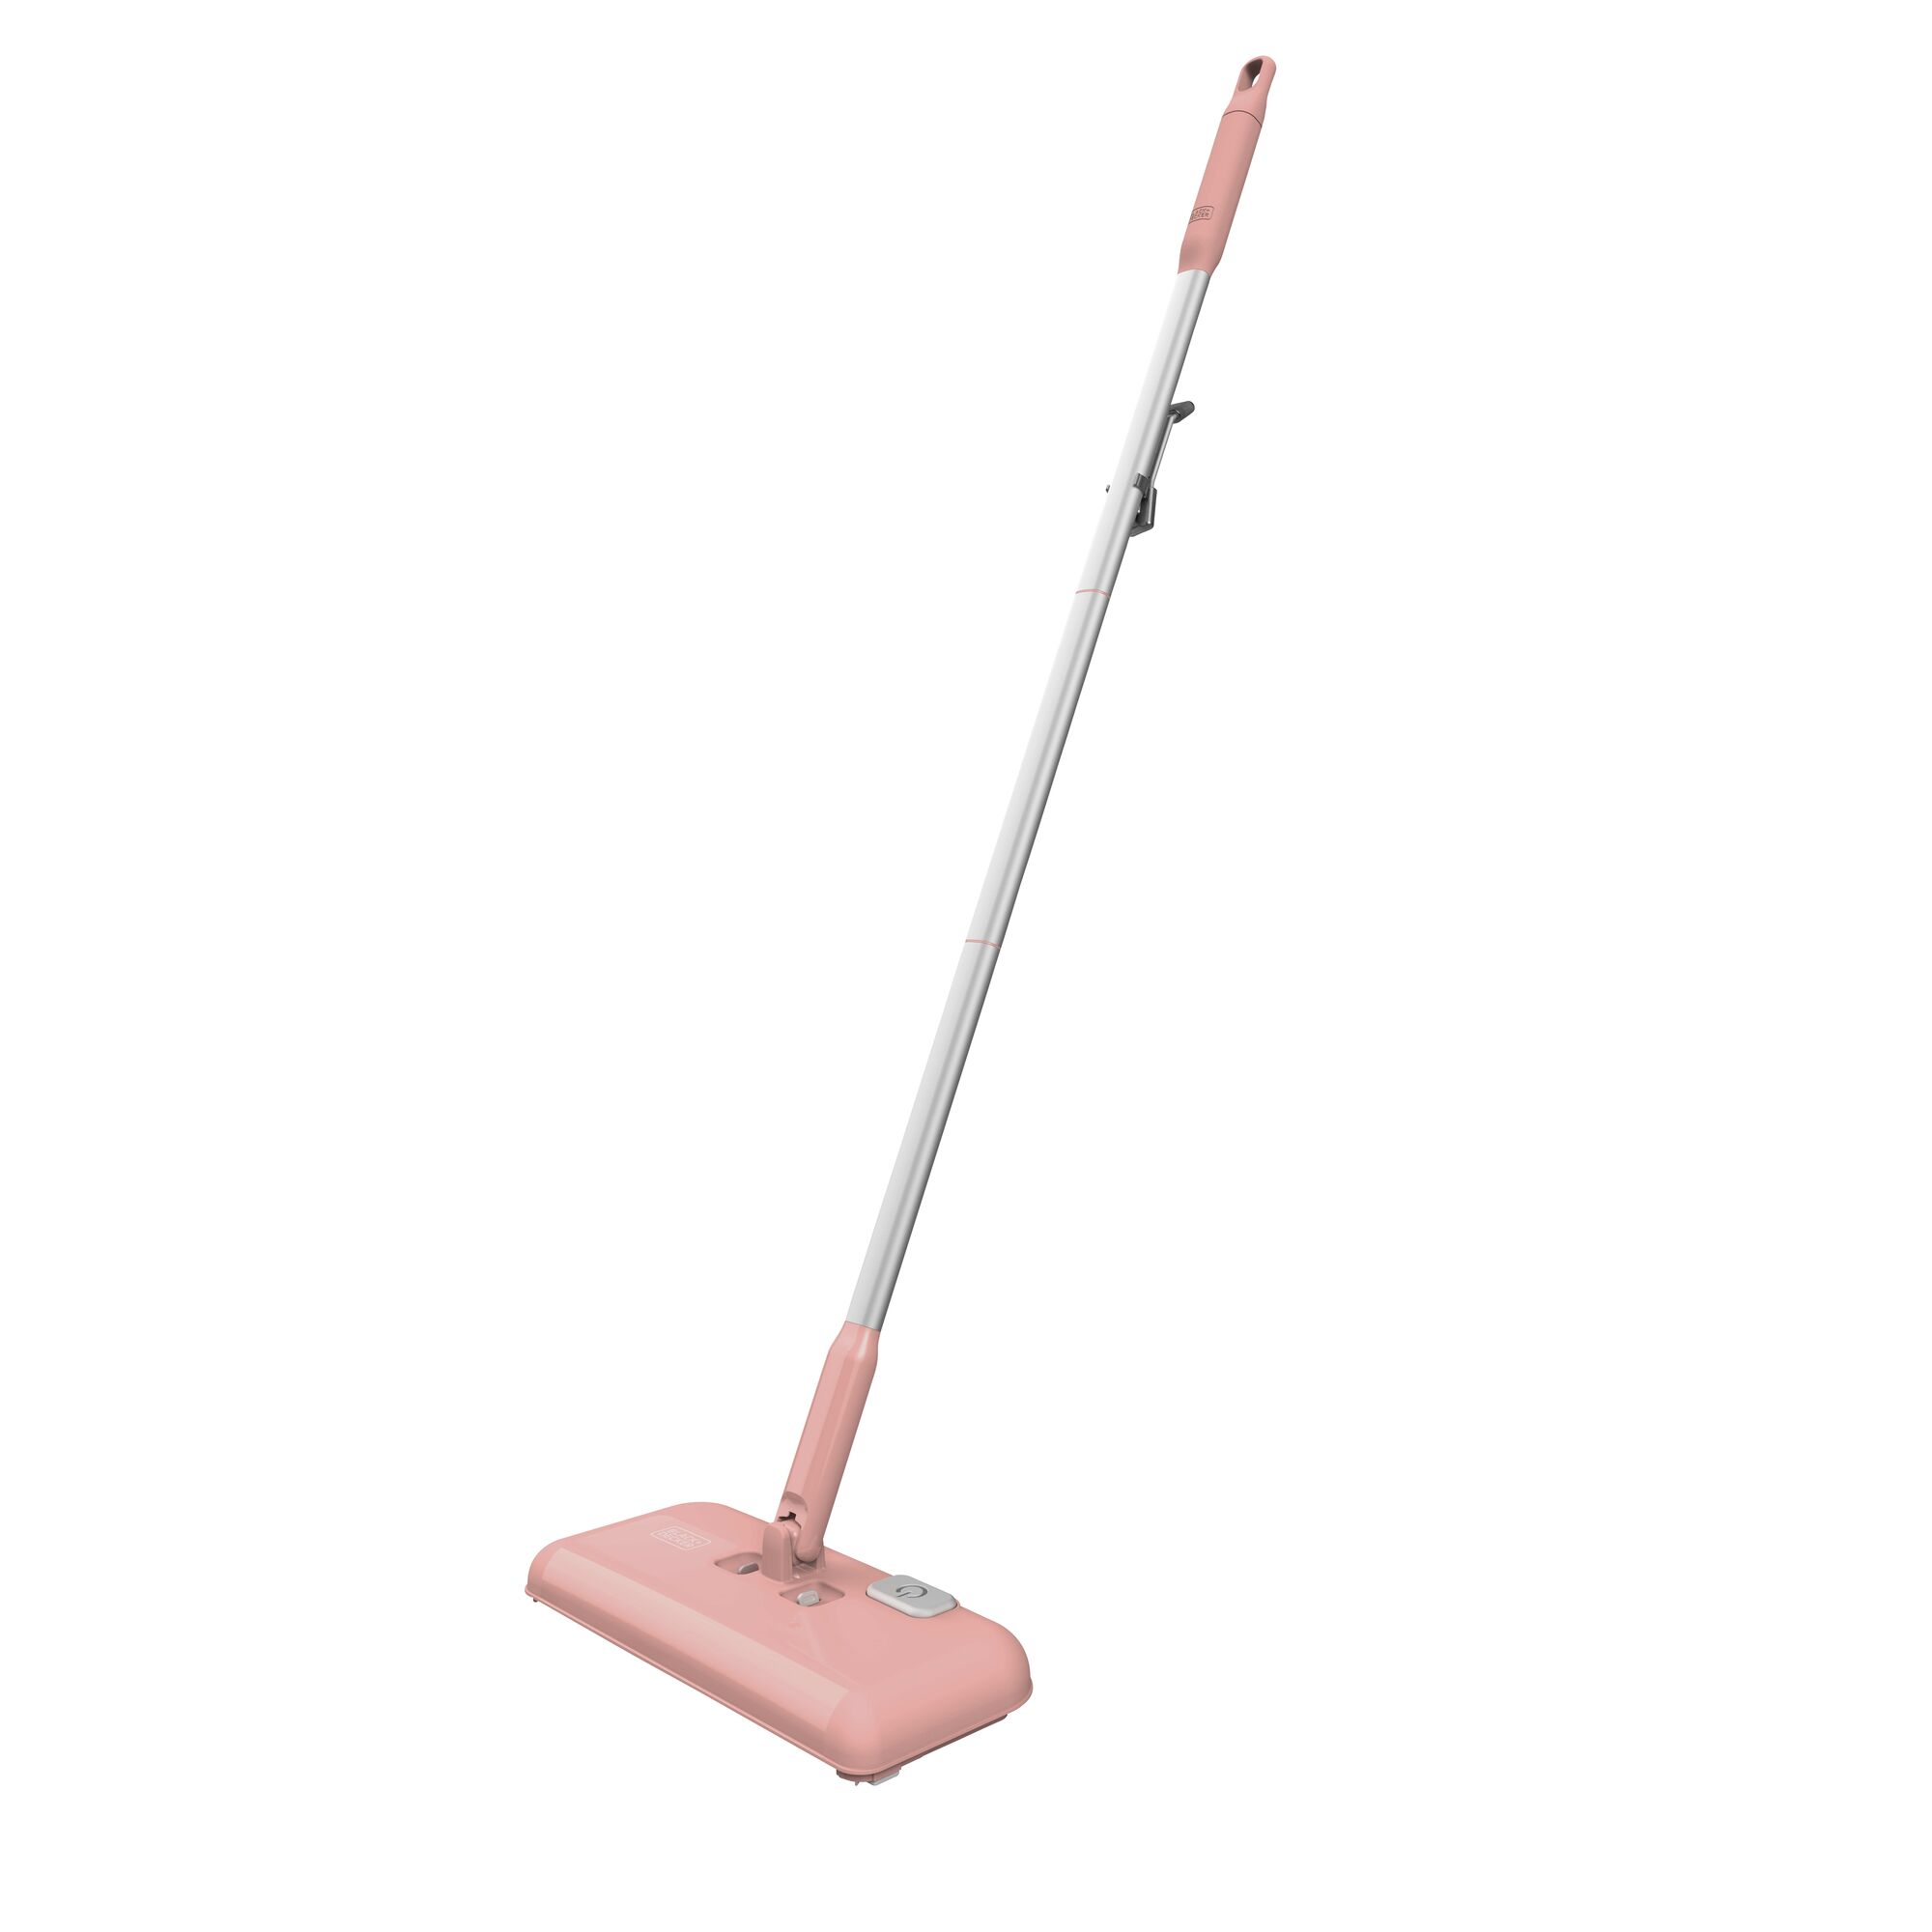 Profile of powered pearl blush floor sweeper.